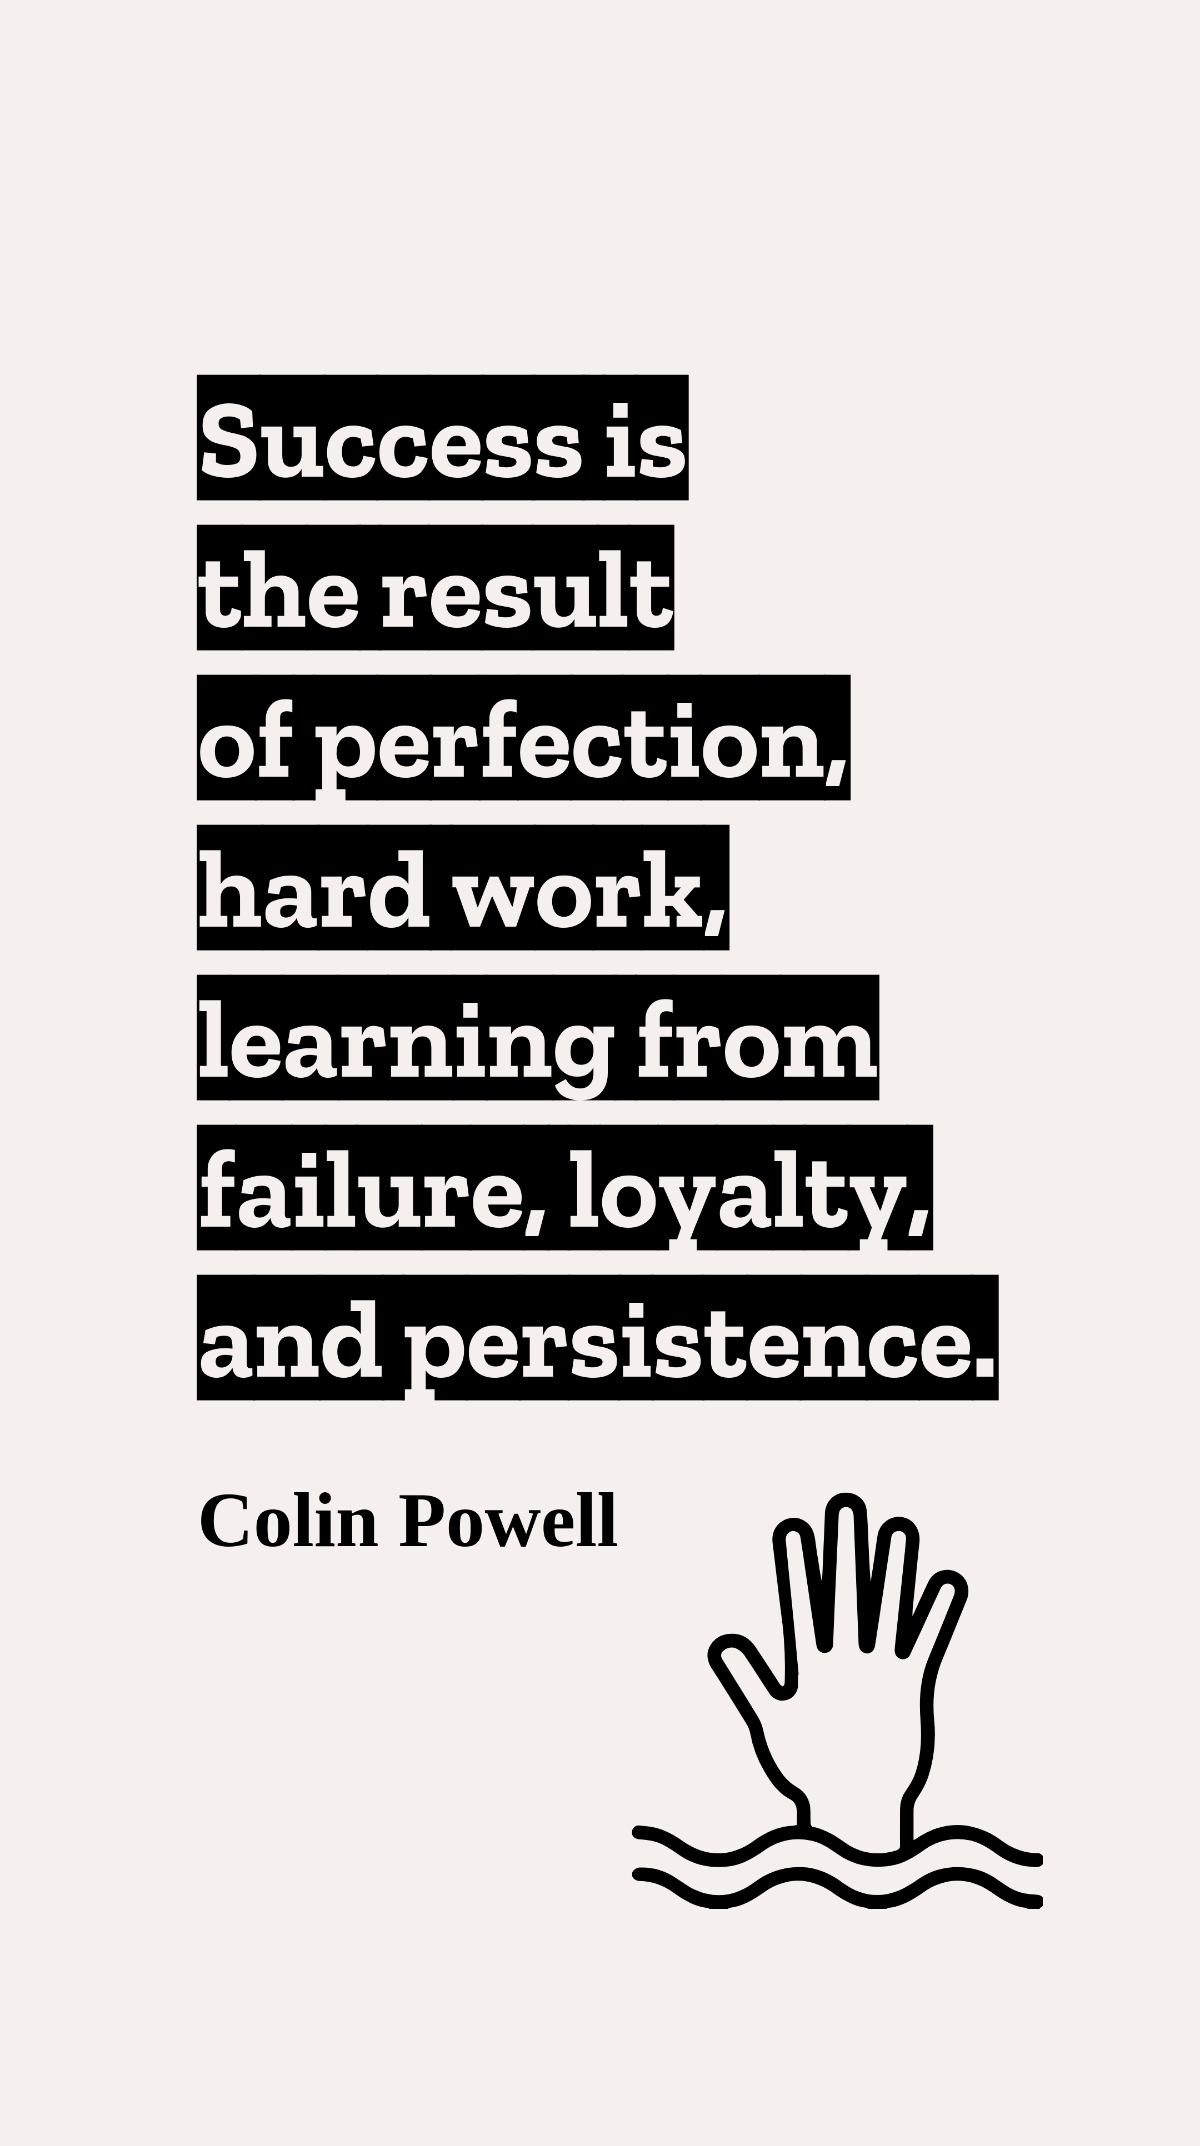 Colin Powell - Success is the result of perfection, hard work, learning from failure, loyalty, and persistence. Template